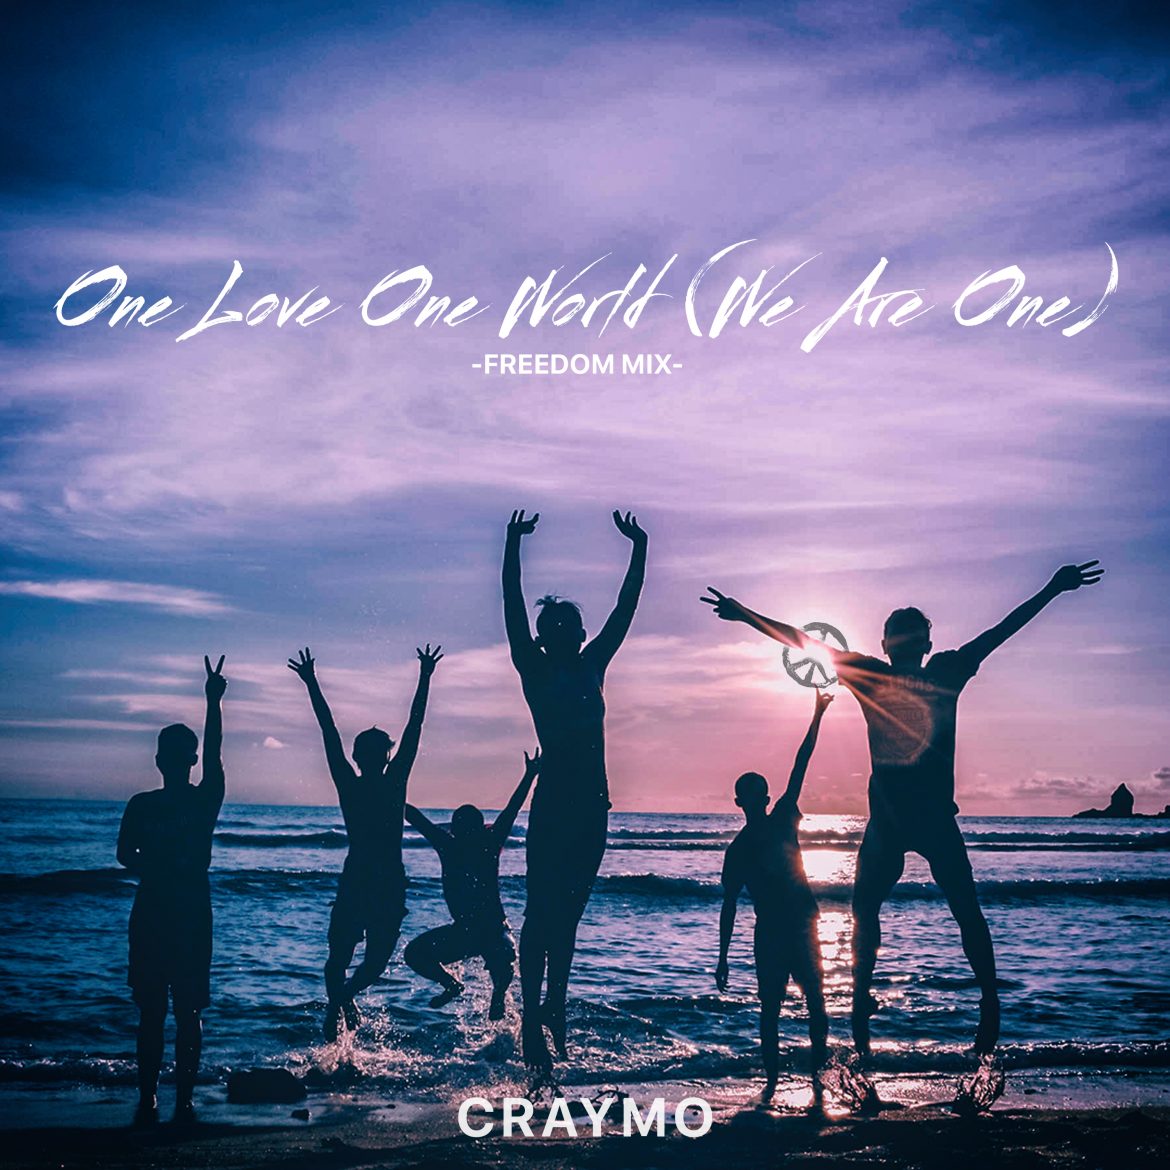 One Love One World (We Are One) from ‘Craymo’ is an uplifting reggaeton song for summer, promoting unity, love, equality, human rights and world peace.